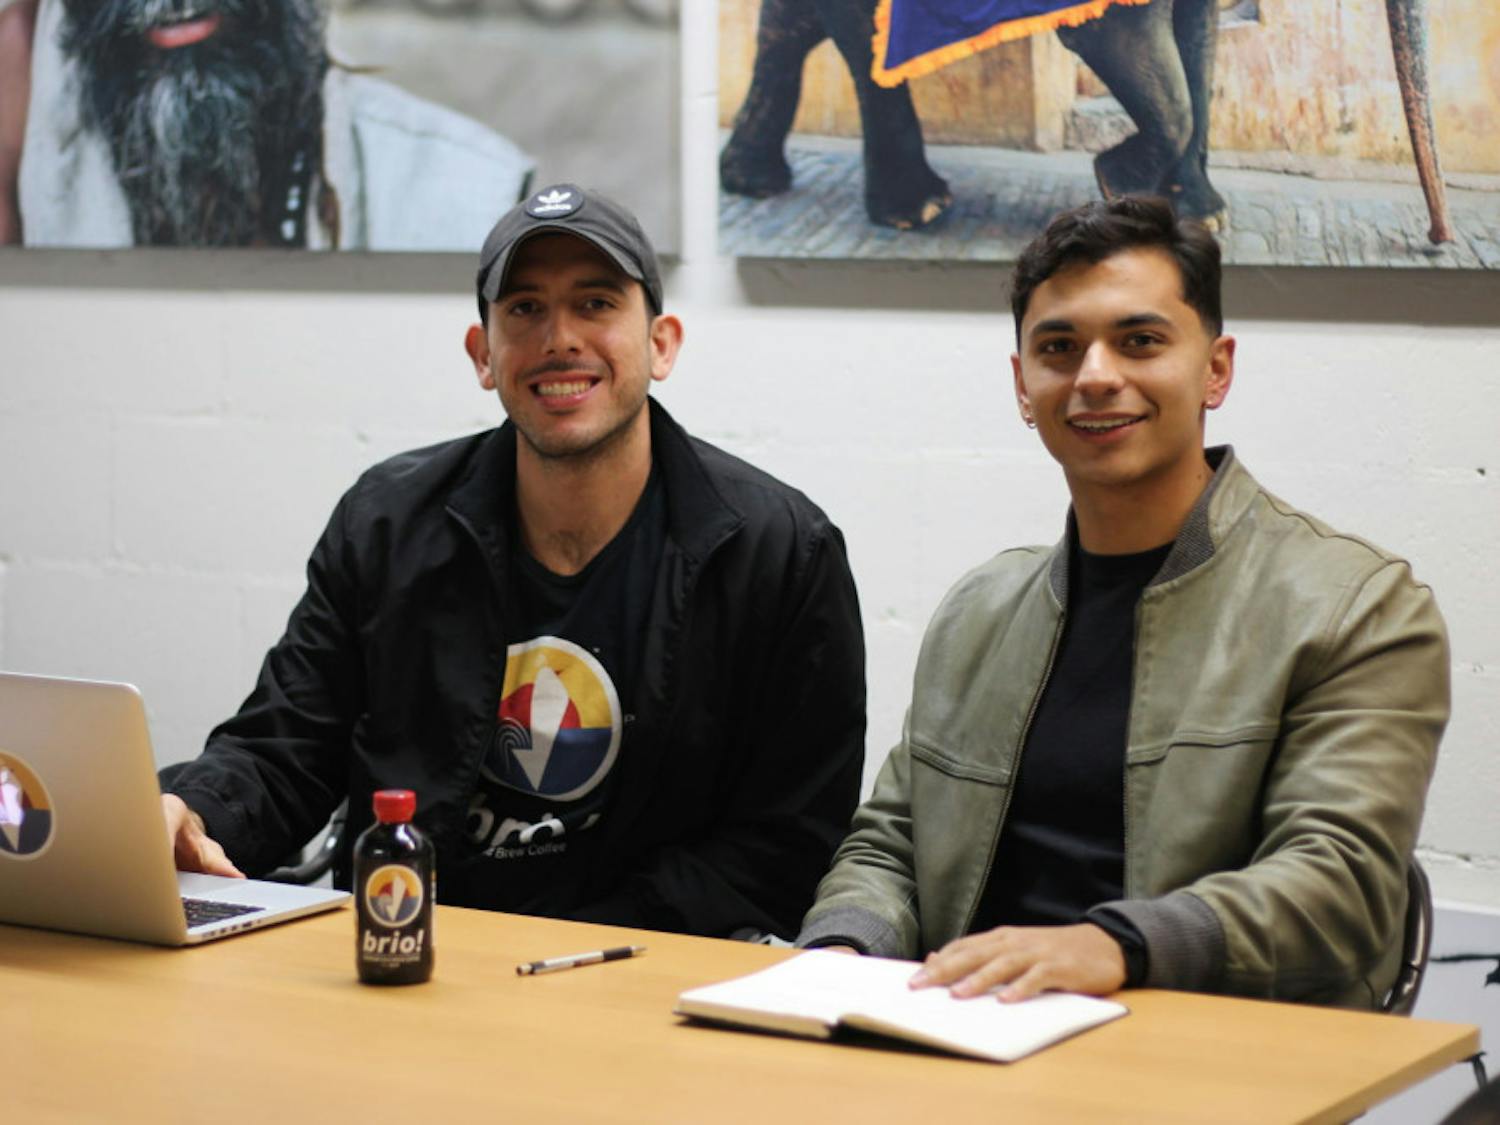 Jose Nieves, 28, who graduated from the Culinary Institute of America in New York, and Miguel Cardona, 27, who graduated from the UF School of Architecture.&nbsp;
&nbsp;